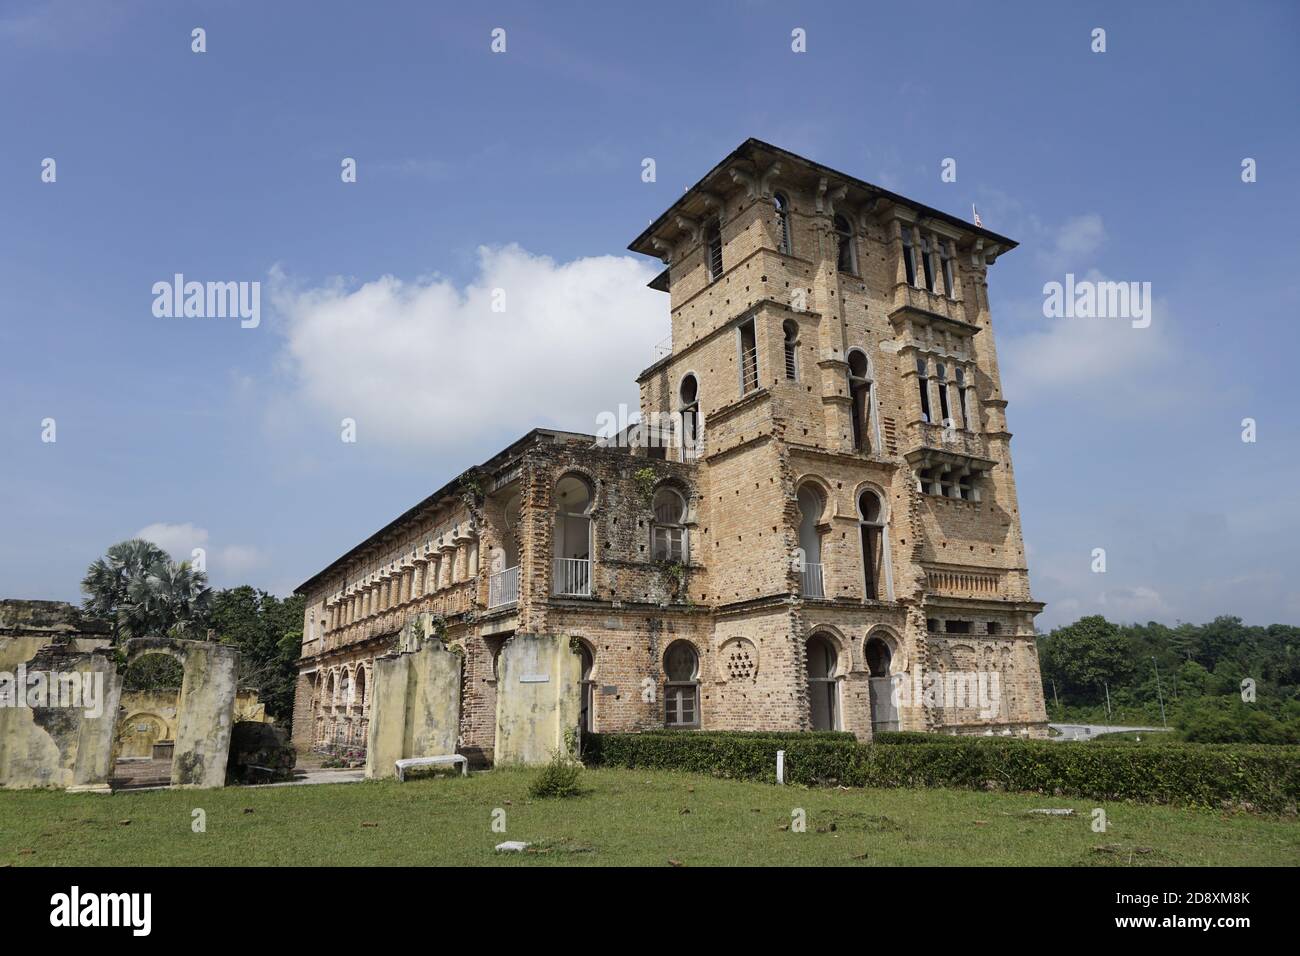 Kellie's Castle is located in Batu Gajah, Perak, Malaysia. The unfinished, ruined mansion, was built by a Scottish planter William Kellie-Smith Stock Photo